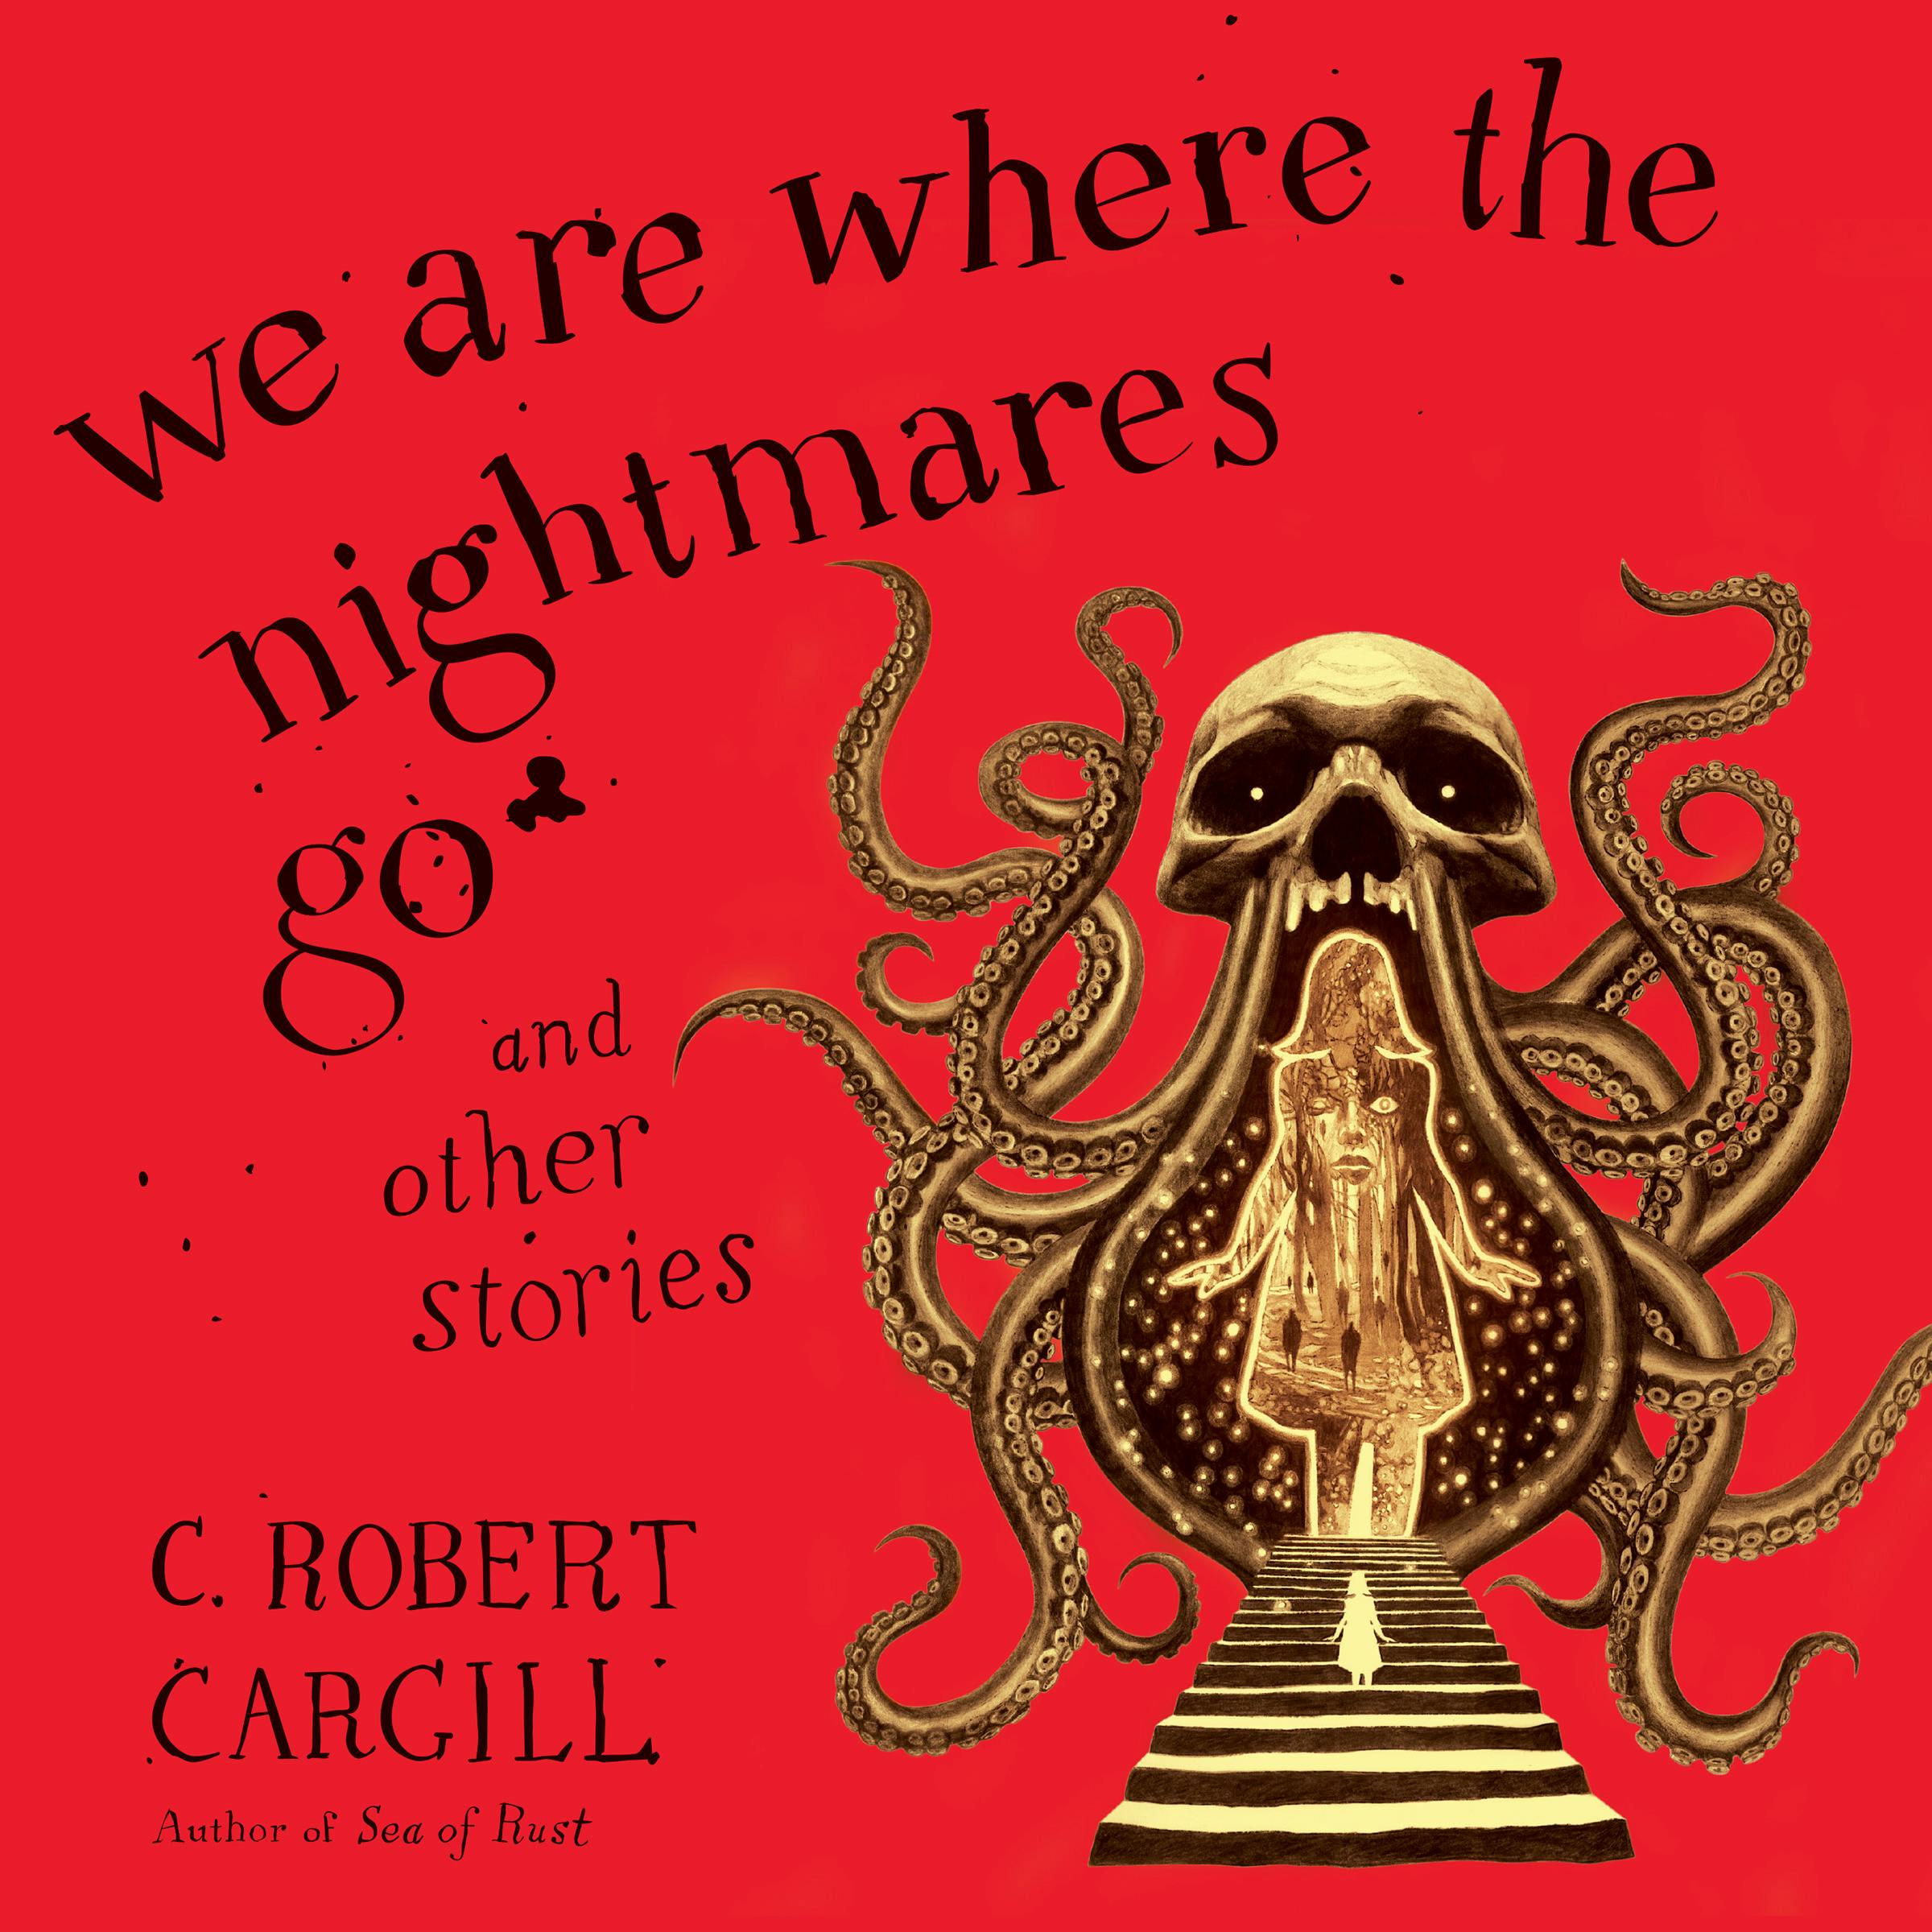 We Are Where the Nightmares Go and Other Stories - undefined